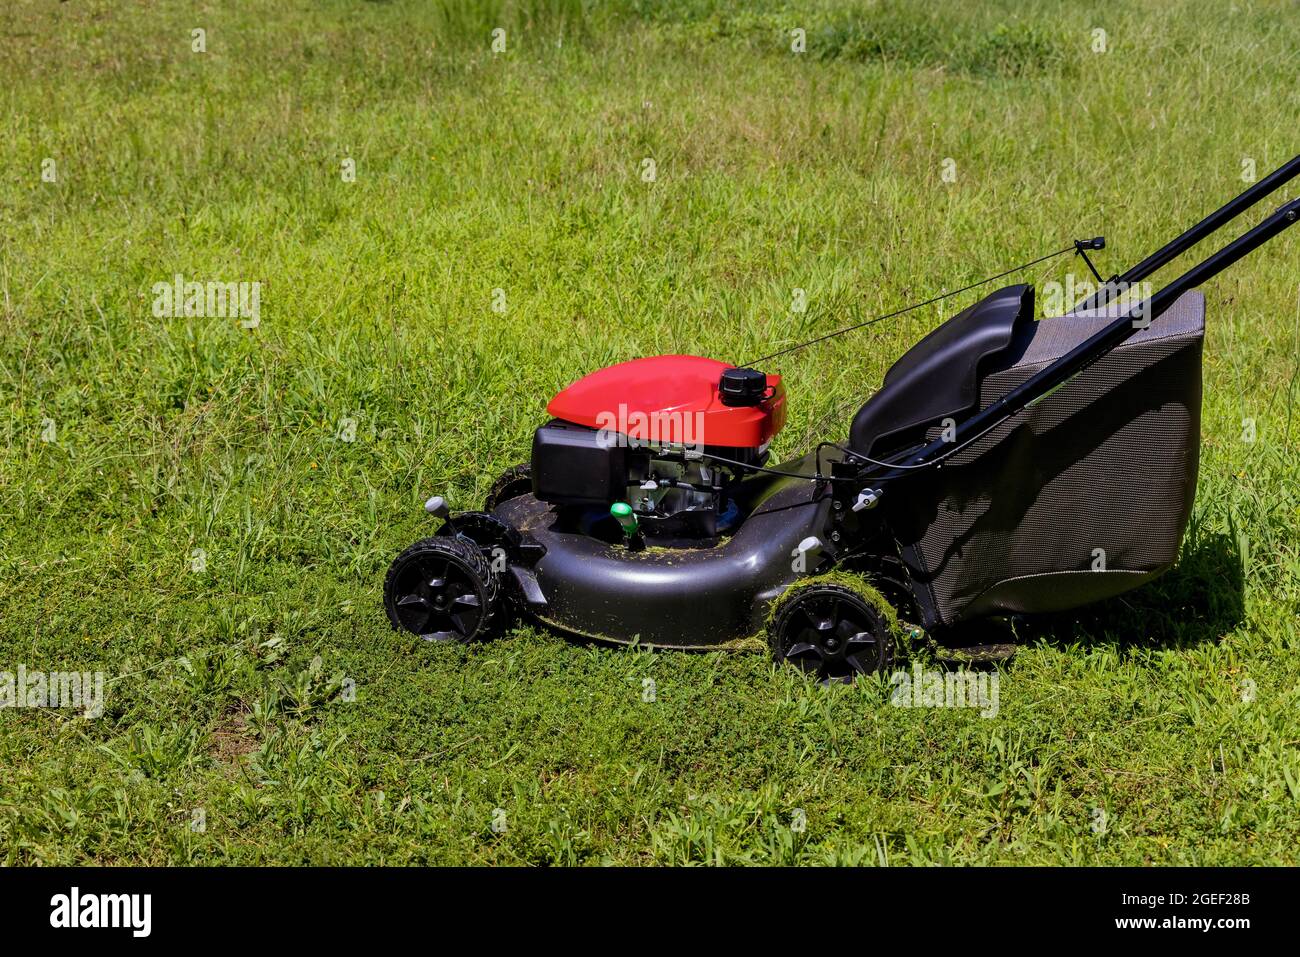 Ride-on lawnmower utility worker in lawn mower gardener cutting the grass Stock Photo